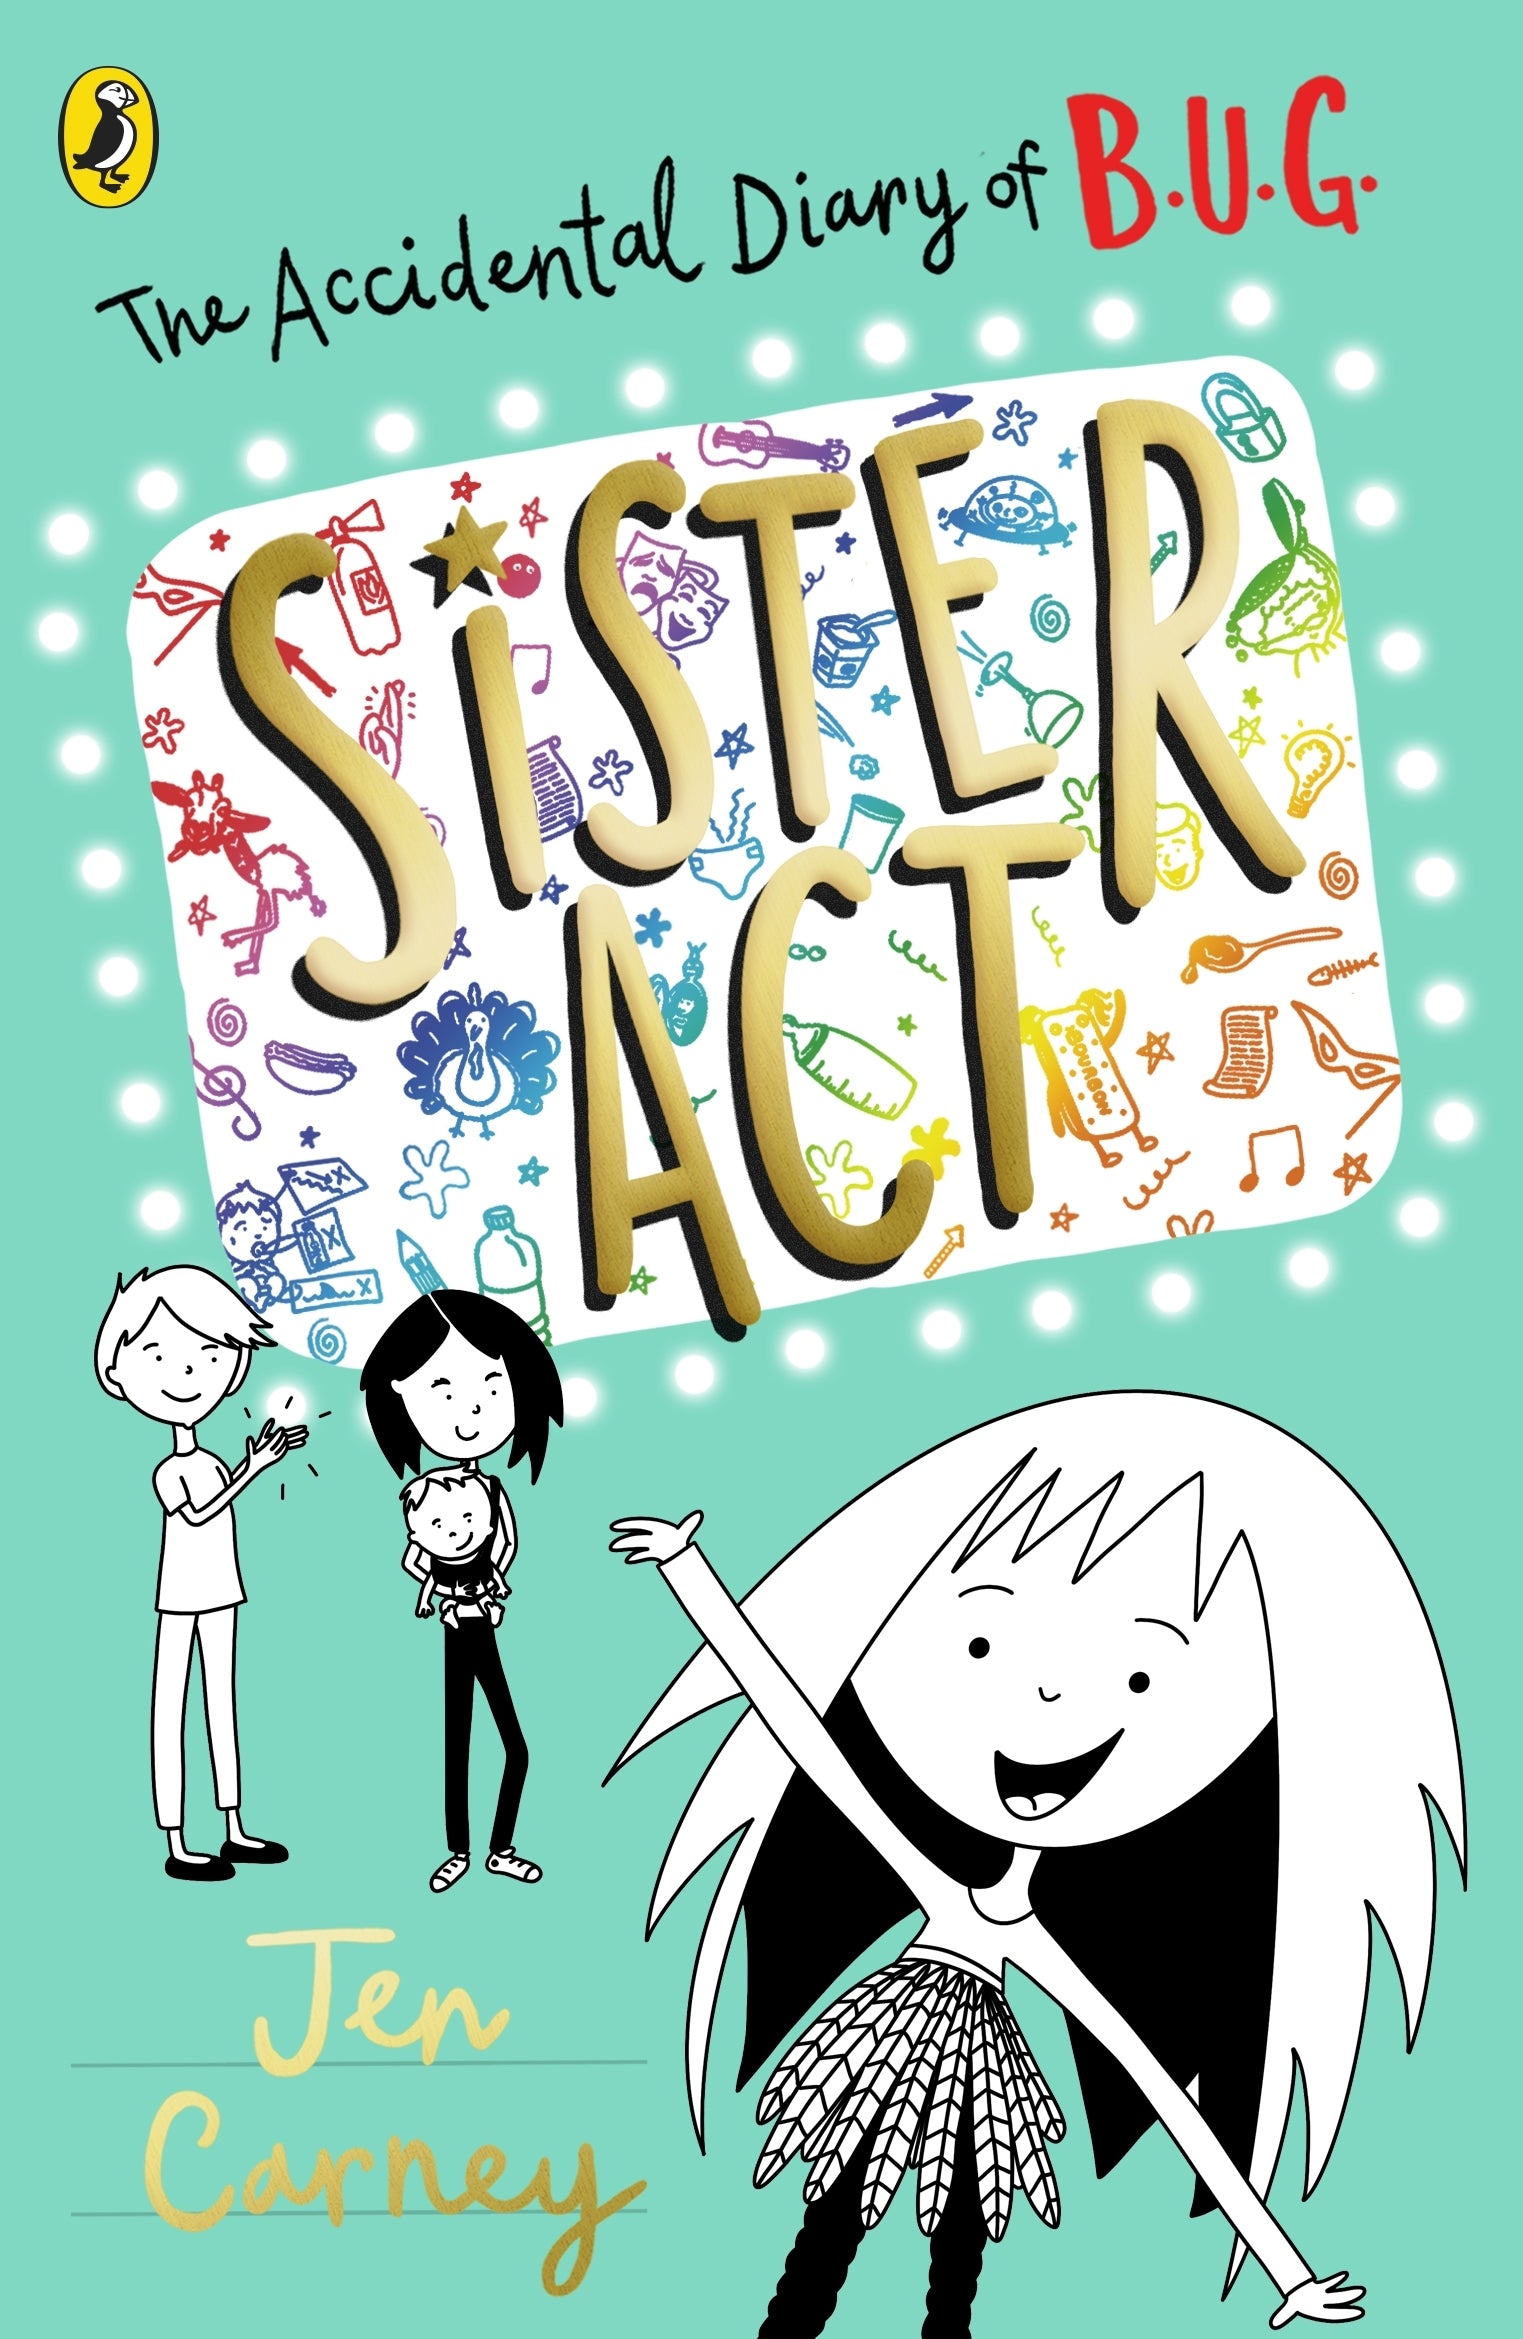 The Accidental Diary of B.U.G.: Sister Act By Jen Carney